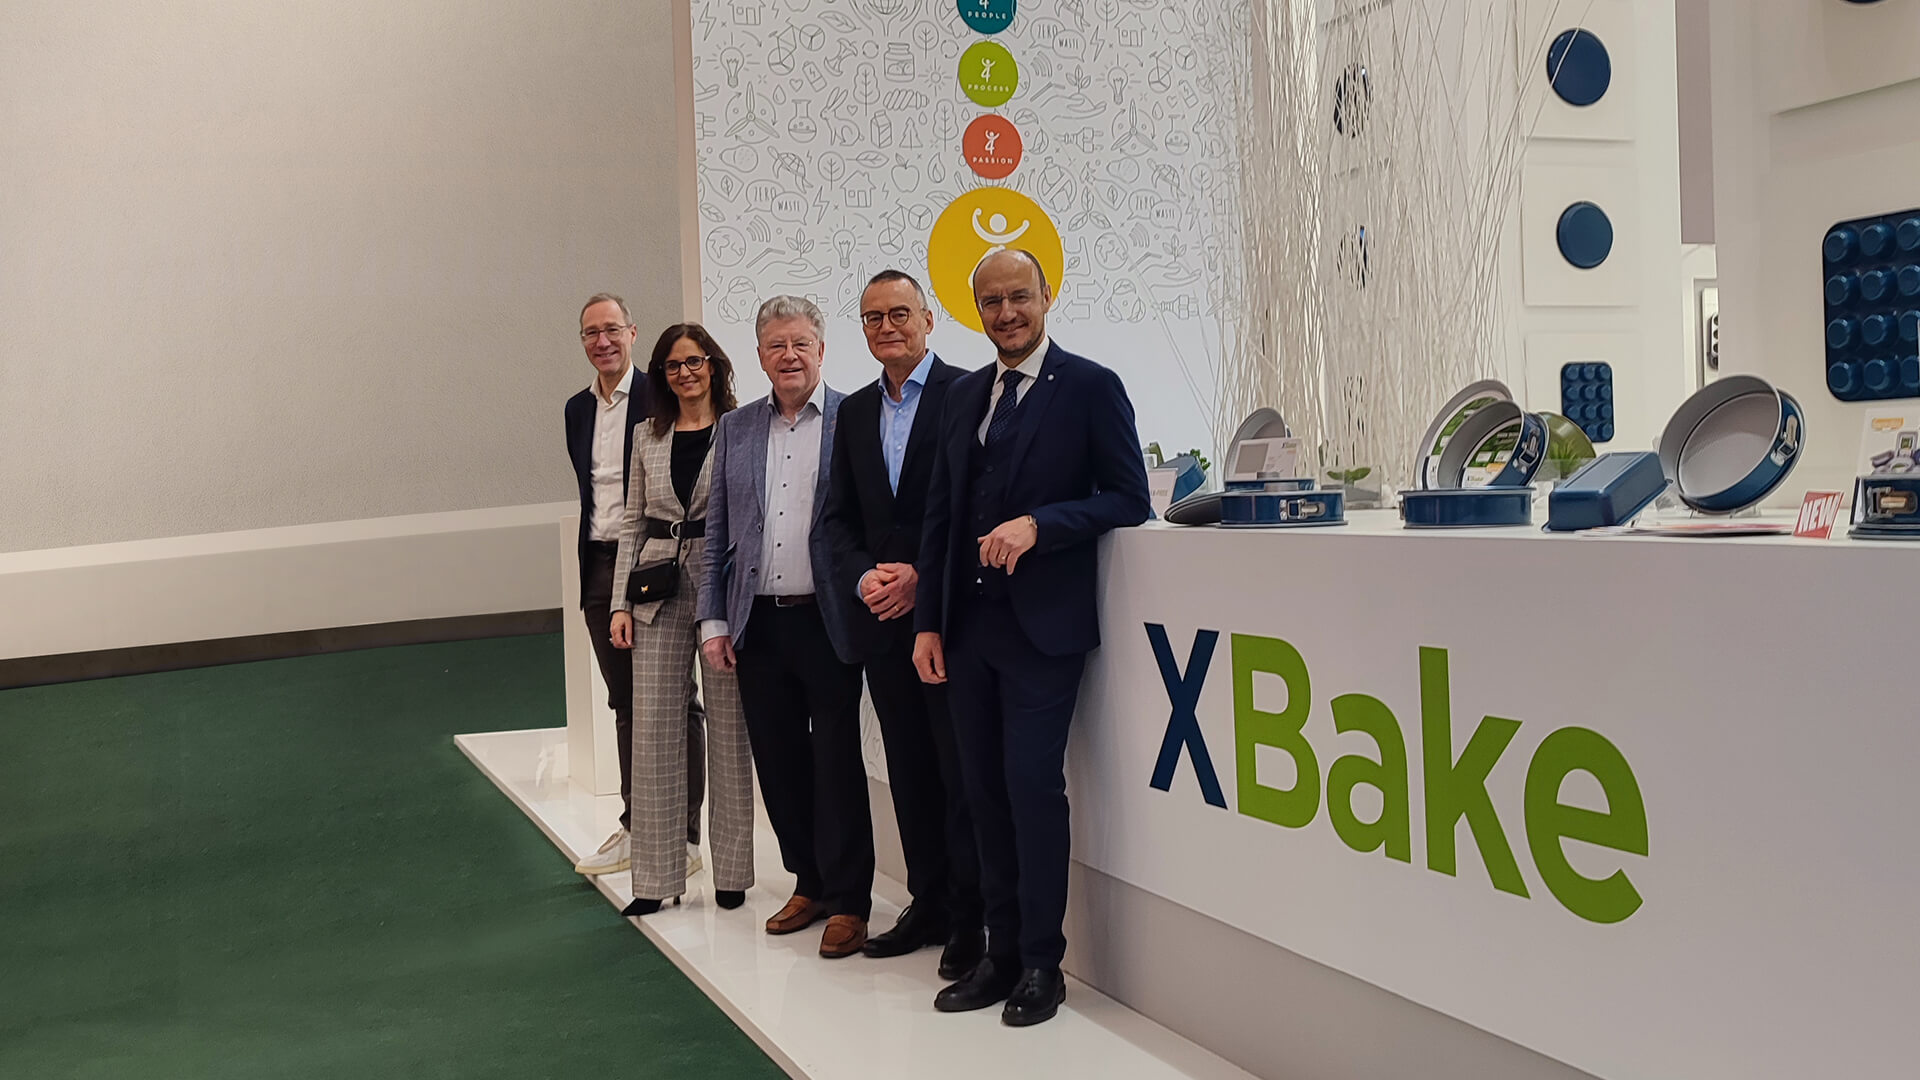 XBake at Ambiente